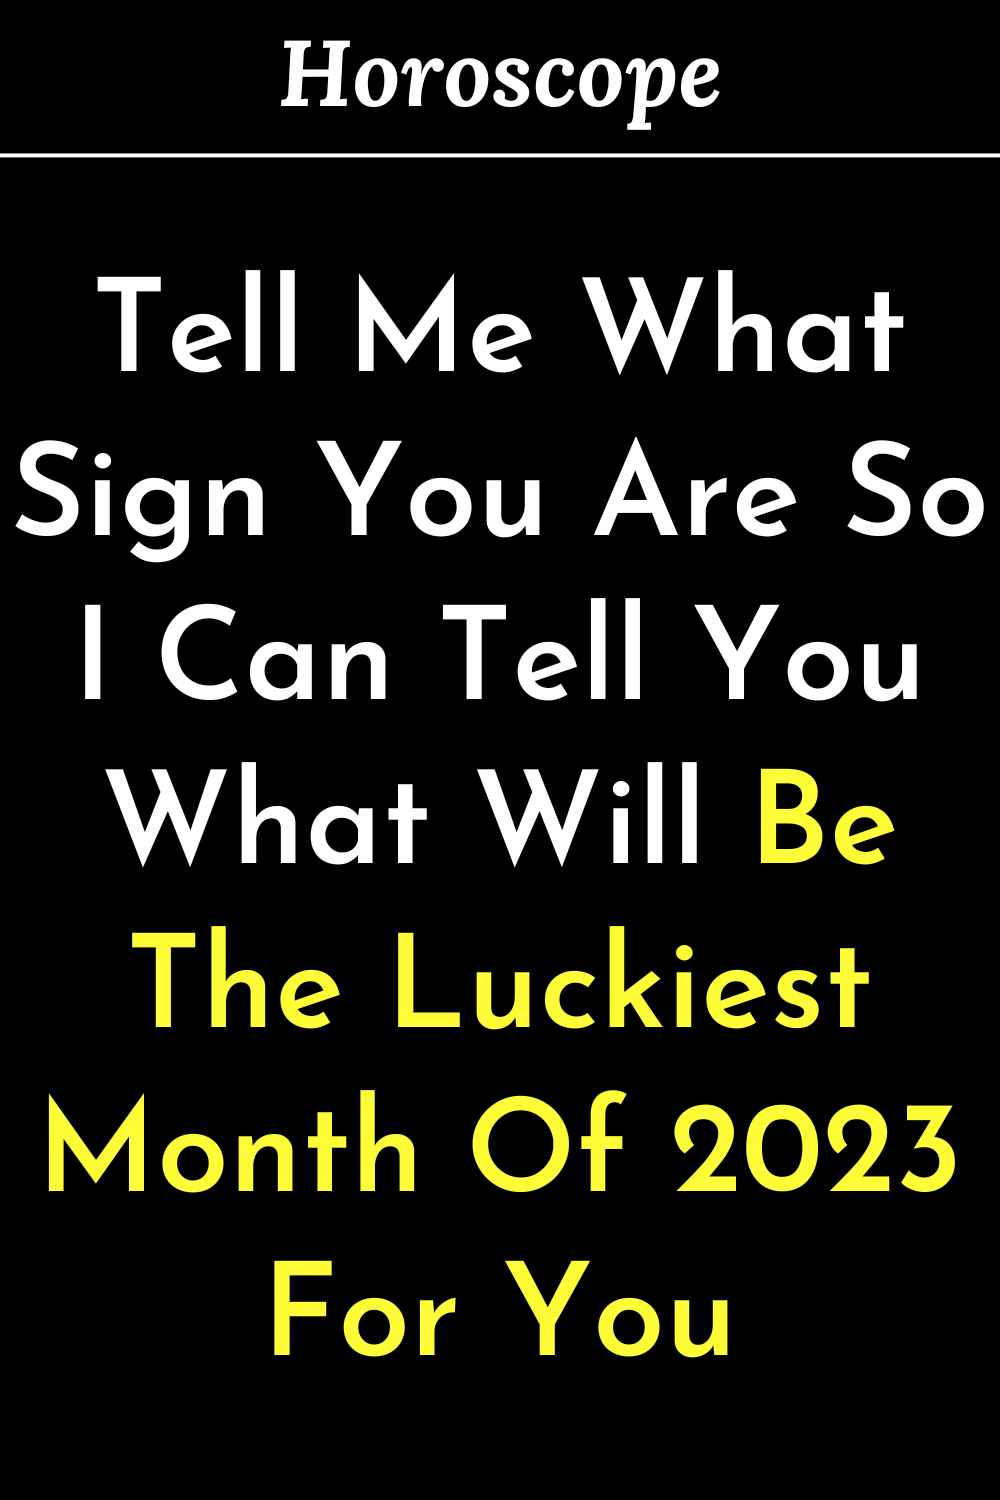 Tell Me What Sign You Are So I Can Tell You What Will Be The Luckiest Month Of 2023 For You